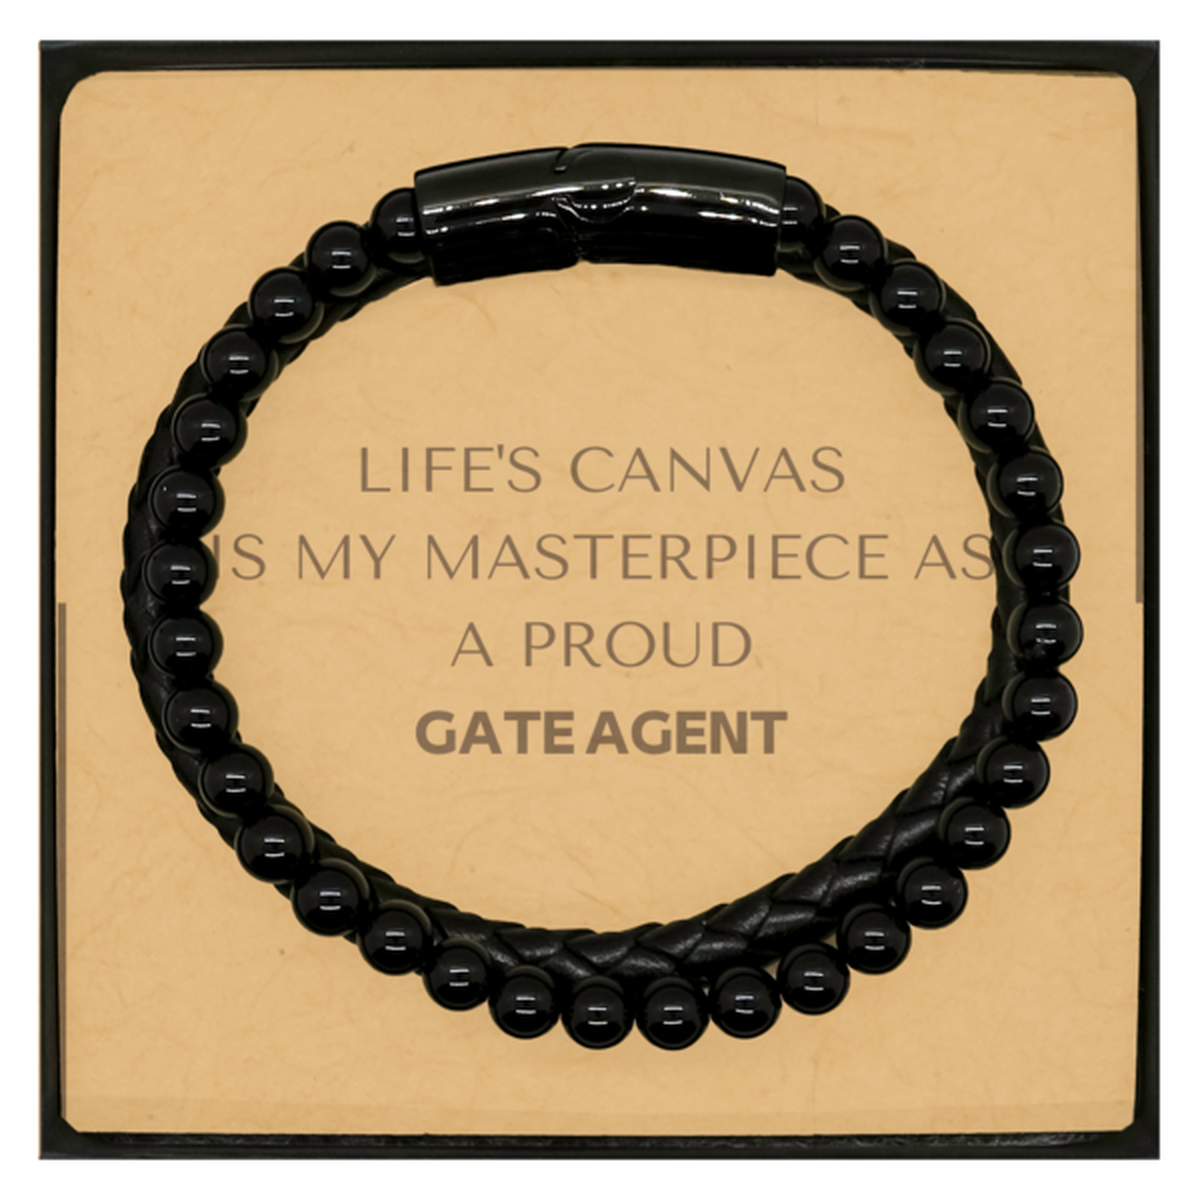 Proud Gate Agent Gifts, Life's canvas is my masterpiece, Epic Birthday Christmas Unique Stone Leather Bracelets For Gate Agent, Coworkers, Men, Women, Friends